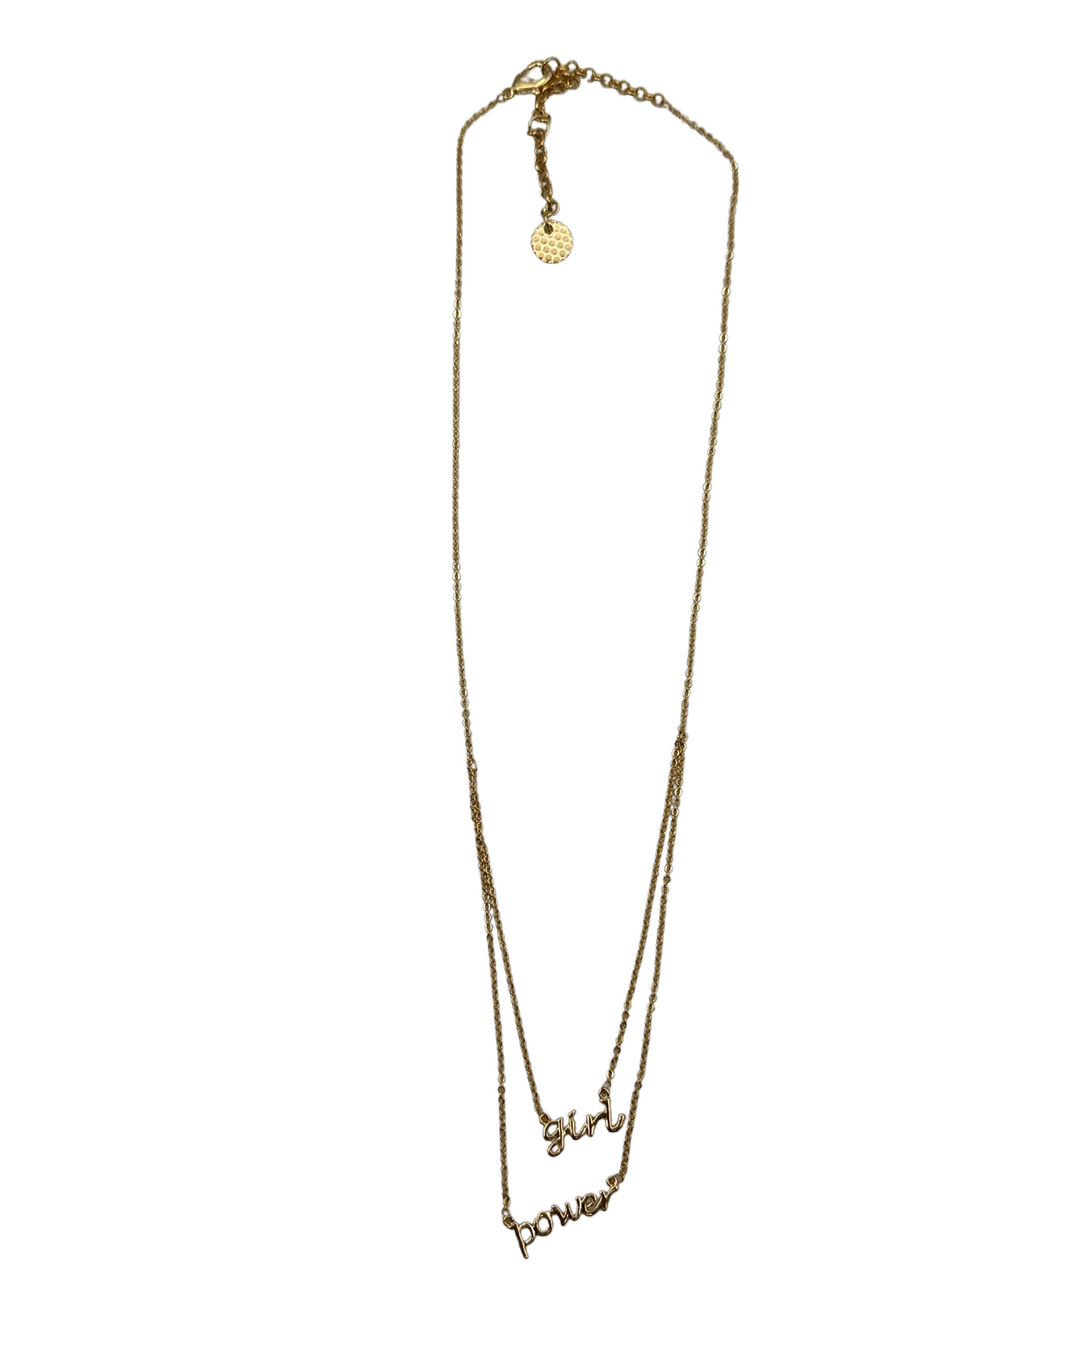 Gold "Girl Power" Necklace